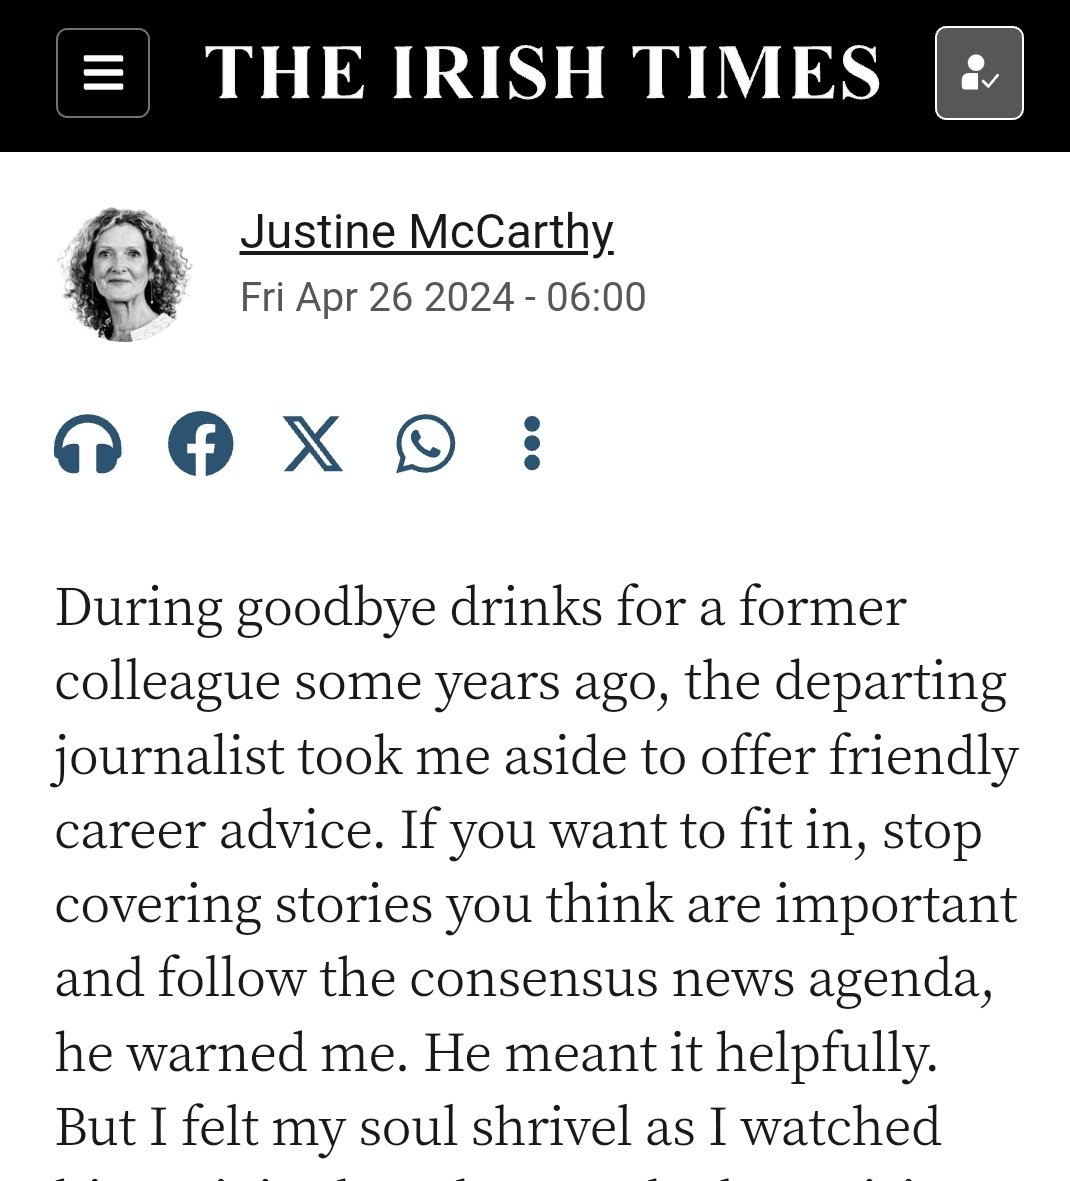 Apparently, if you want to fit in as a journalist in Ireland, the key is to stop covering stories you think are important and follow the consensus news agenda. Do other journalists here think that's true? irishtimes.com/opinion/2024/0…